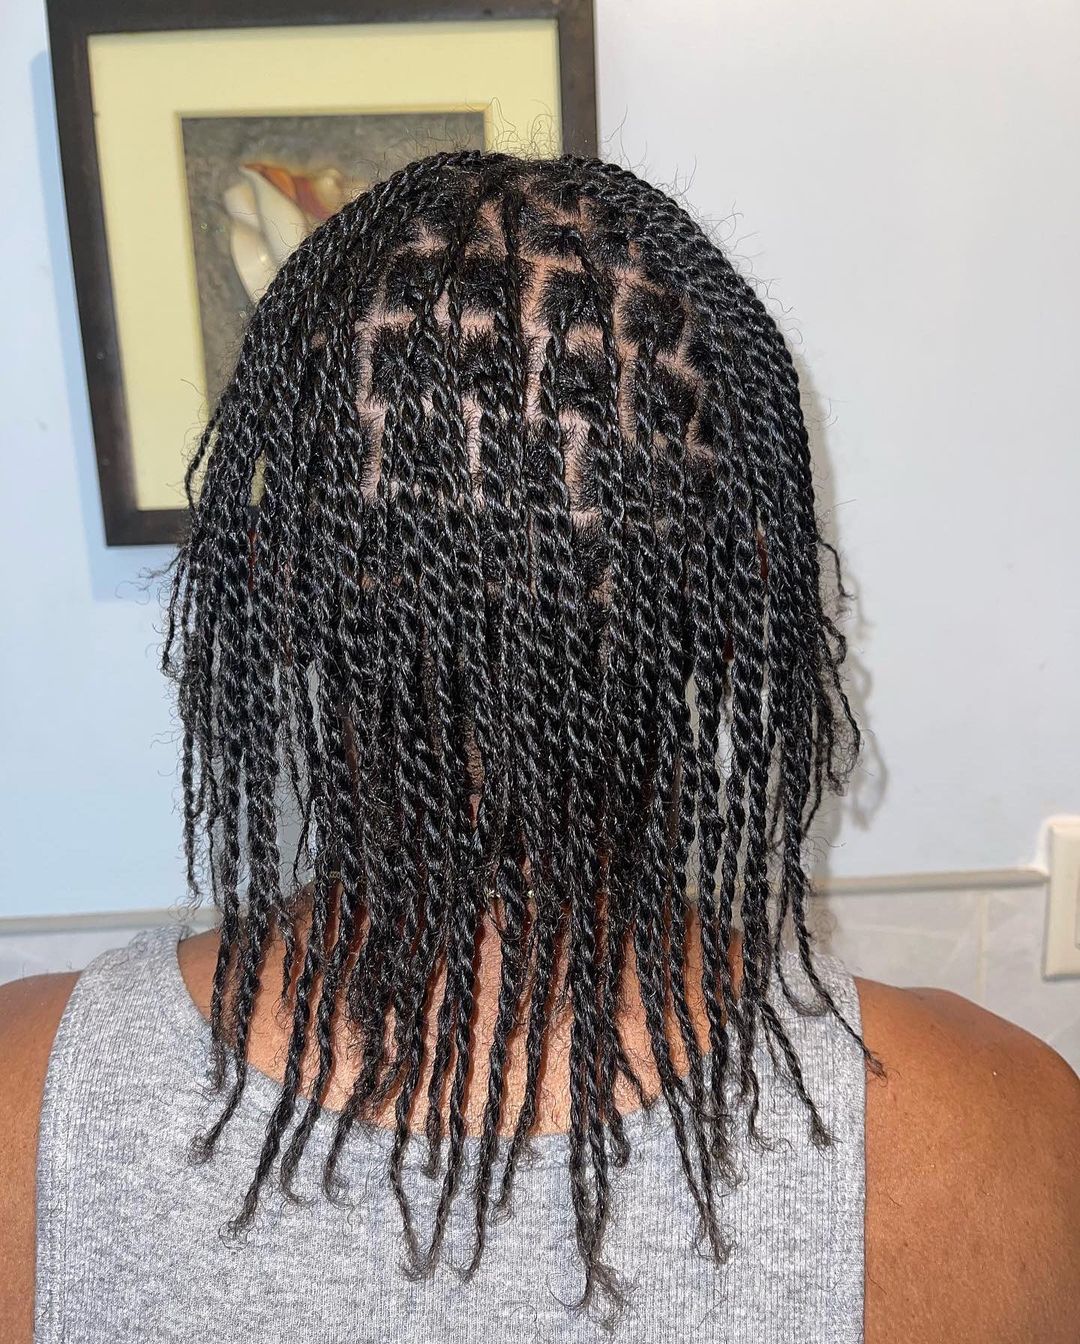 6. Two Strands Rope Twists on Relaxed Hair